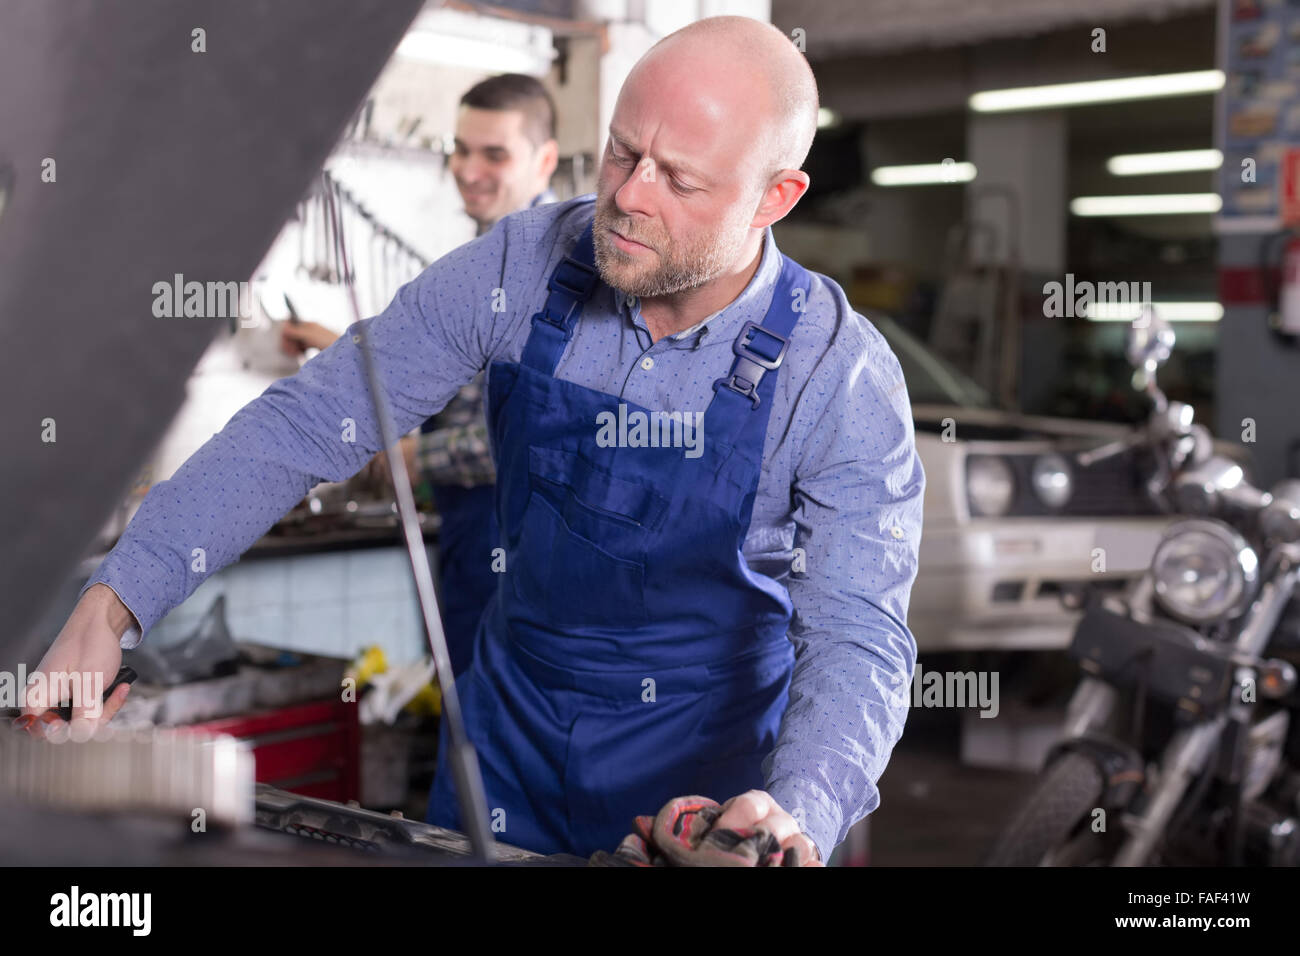 american people working at carshop Stock Photo